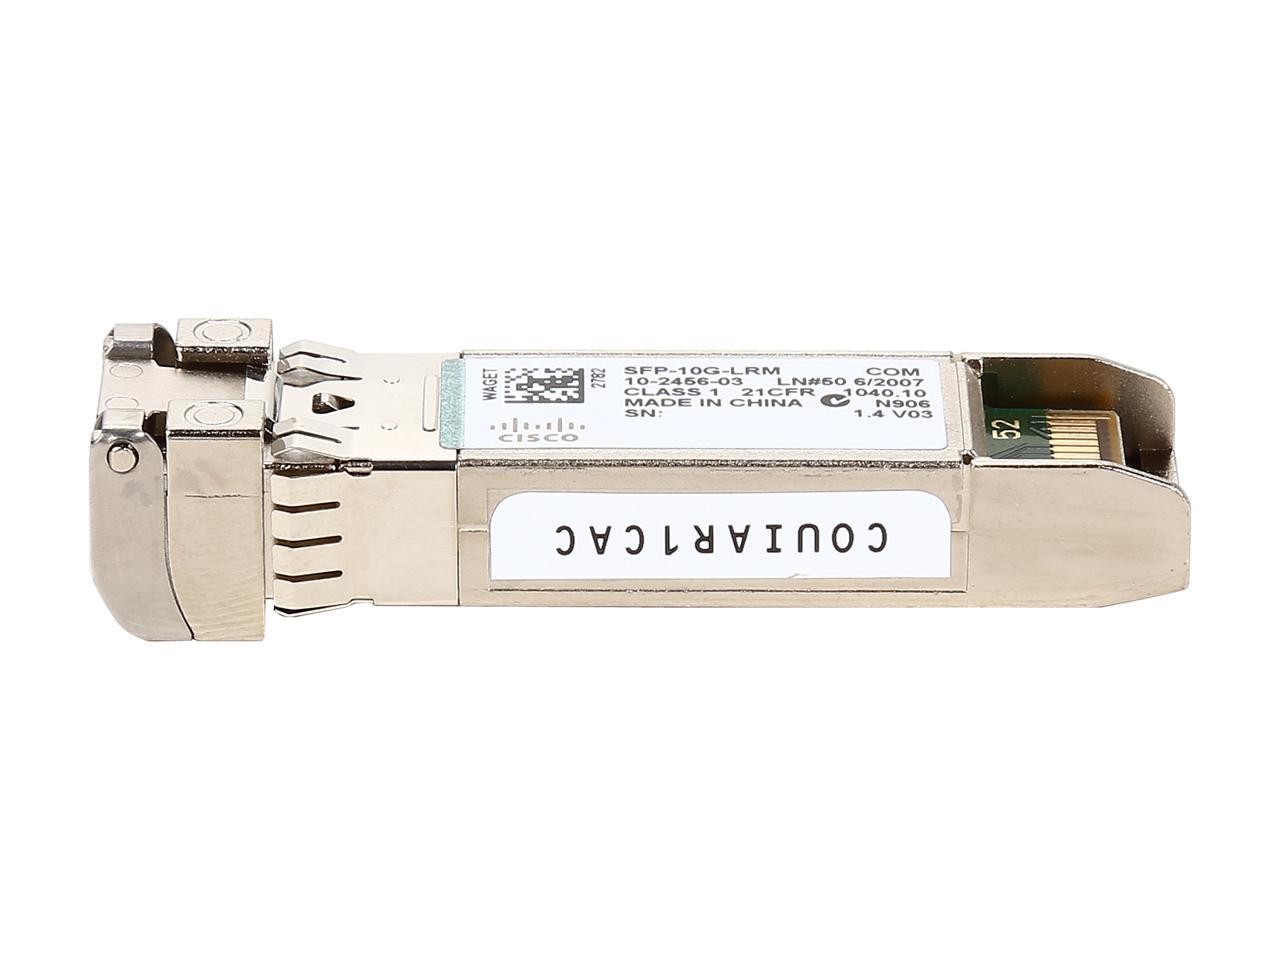 Cisco Small Business SFP-10G-LRM= 10GBASE-LRM SFP+ Transceiver Module for 500 Series 10 Gbps LC duplex connector